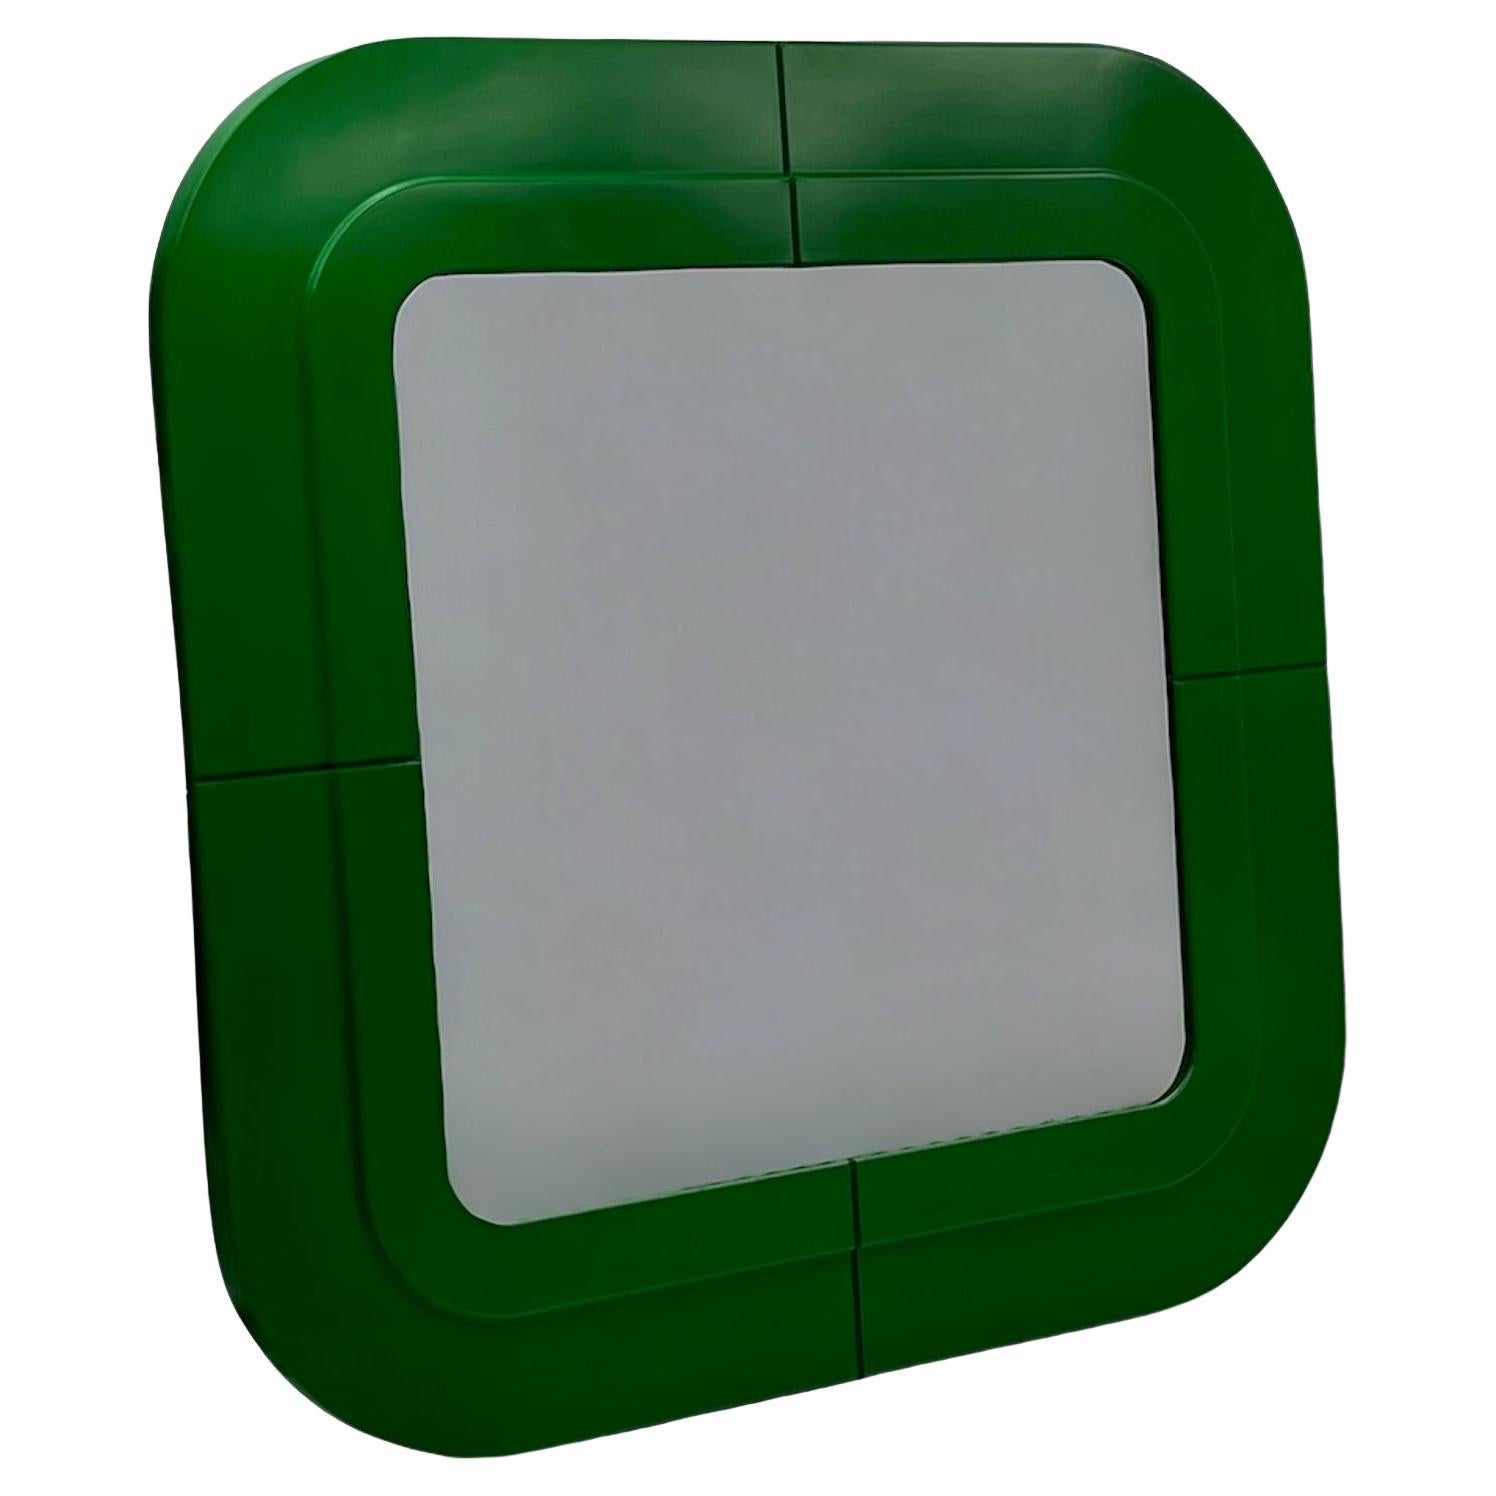 Iconic 1960s Square Wall Mirror Kartell in Green - Anna Castelli Design